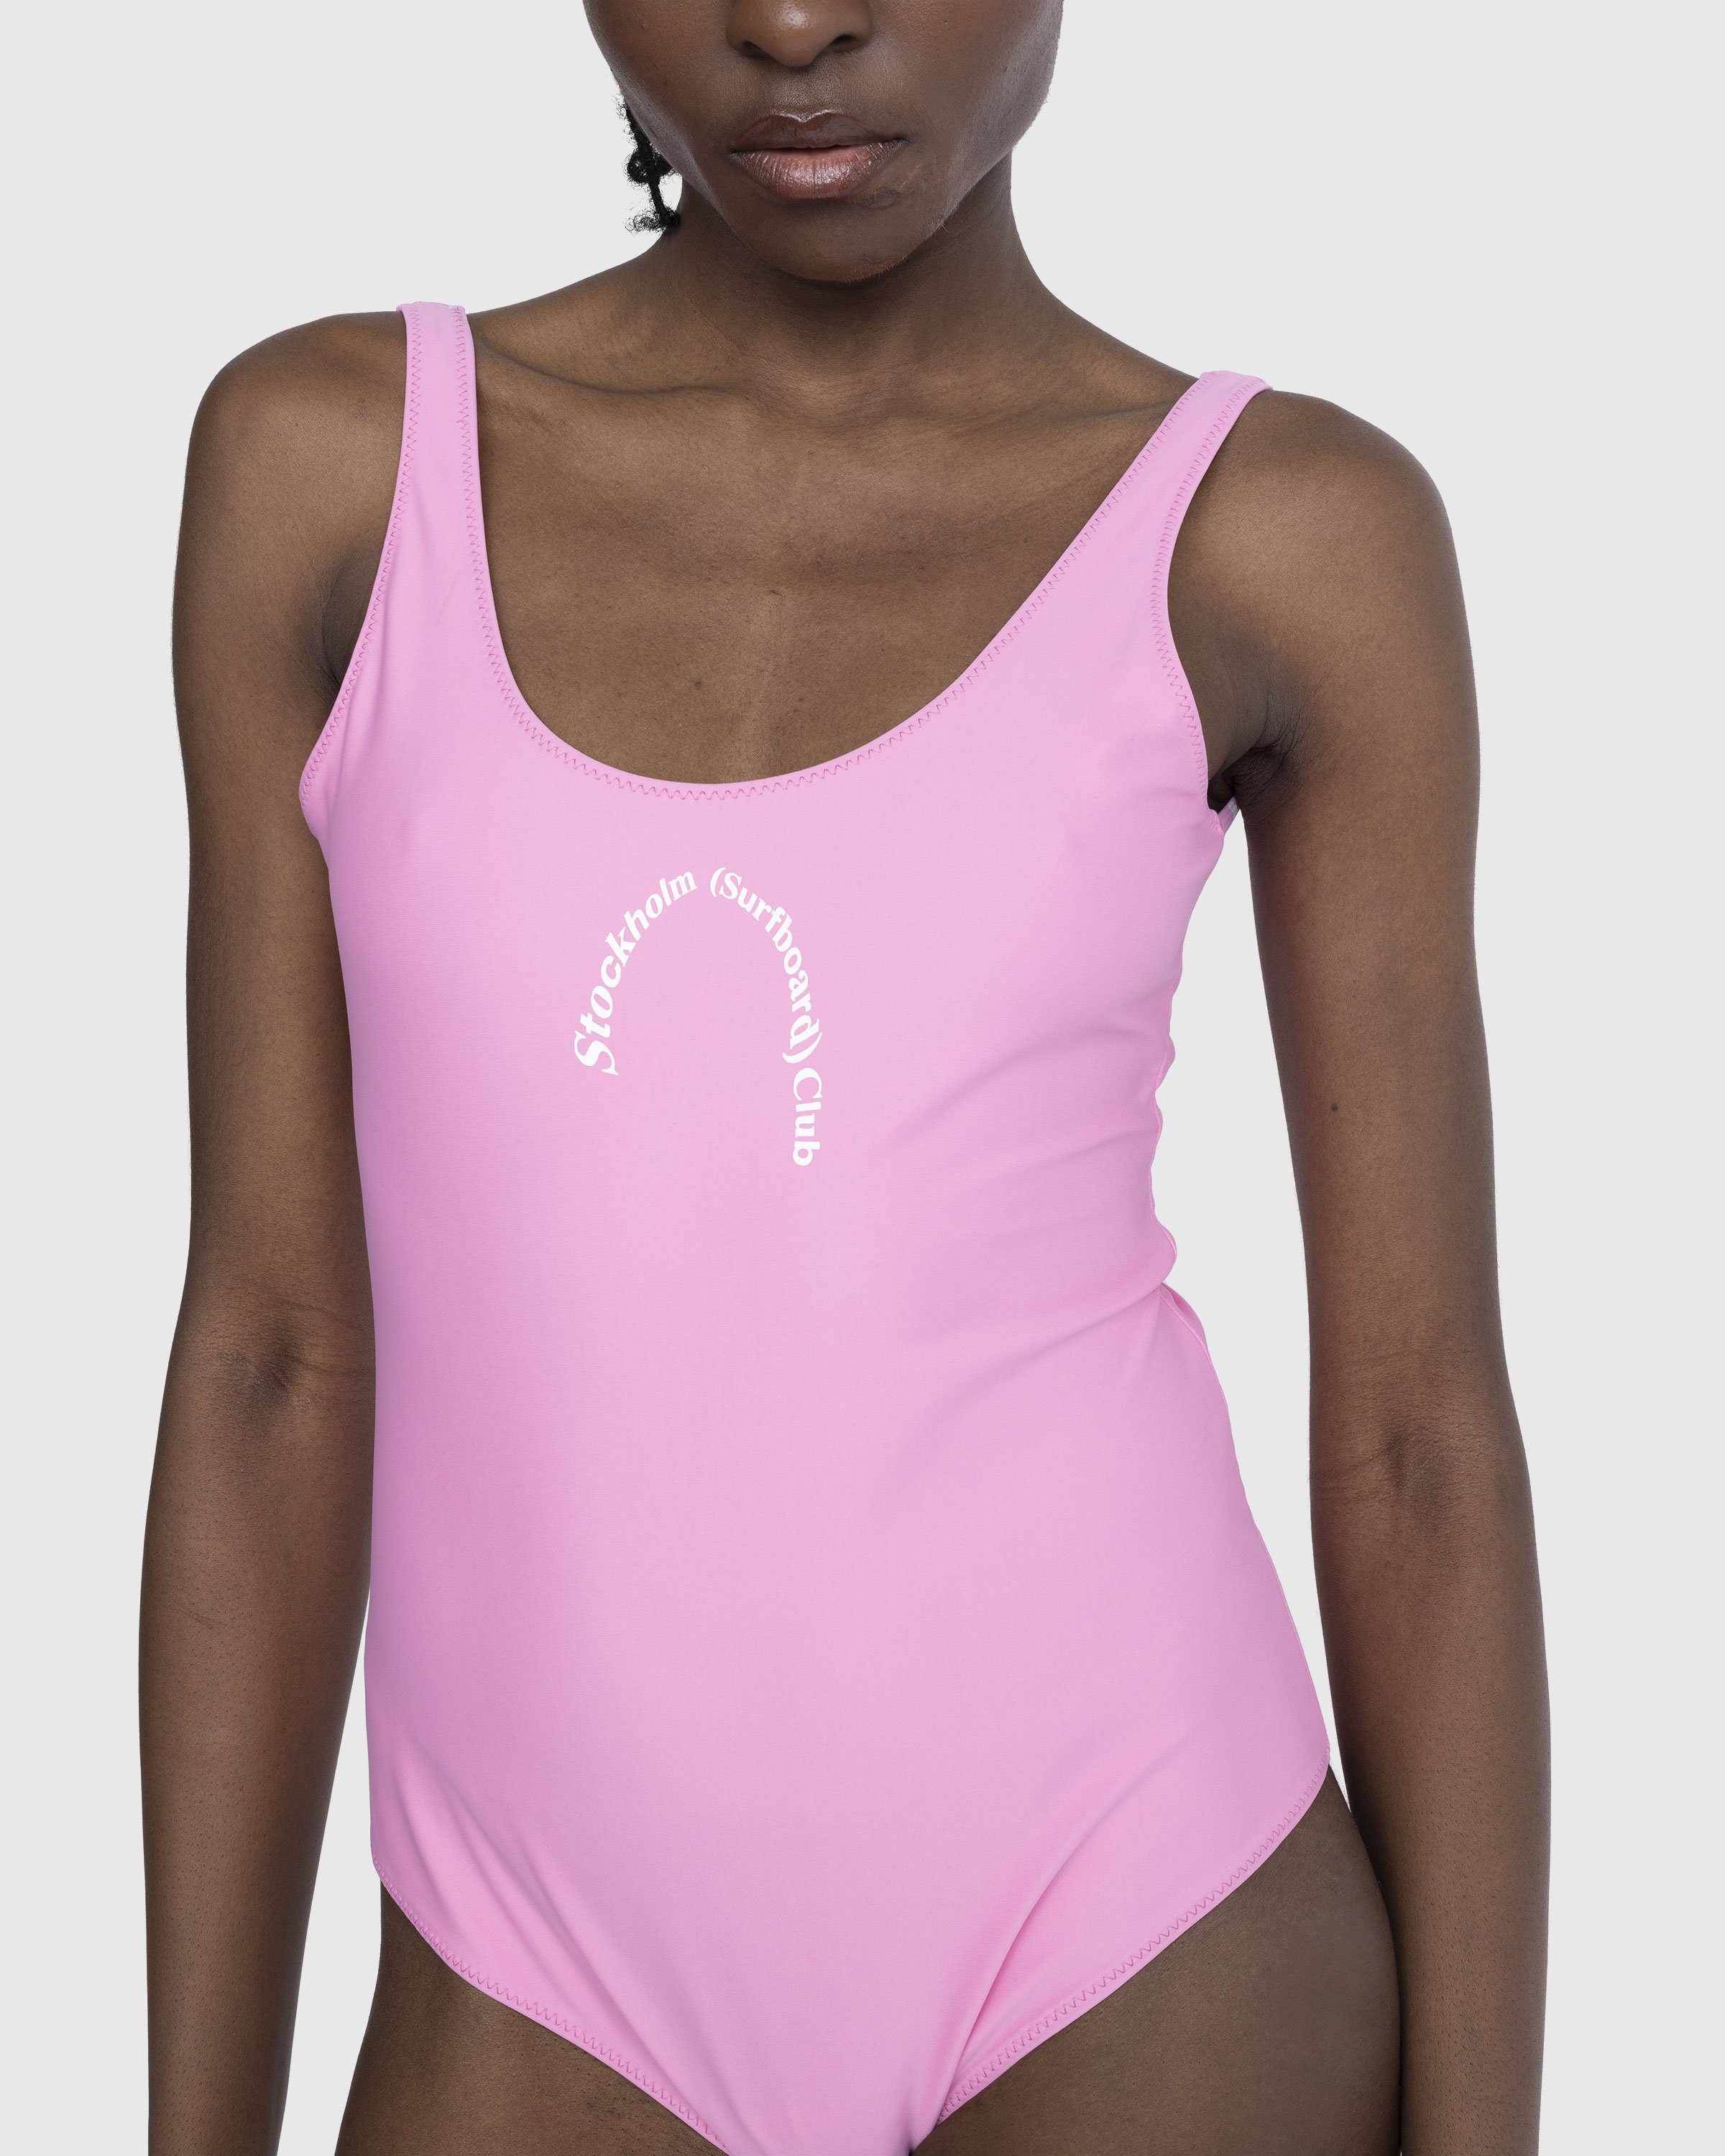 Stockholm Surfboard Club - Swimsuit Pink - Clothing - Multi - Image 5